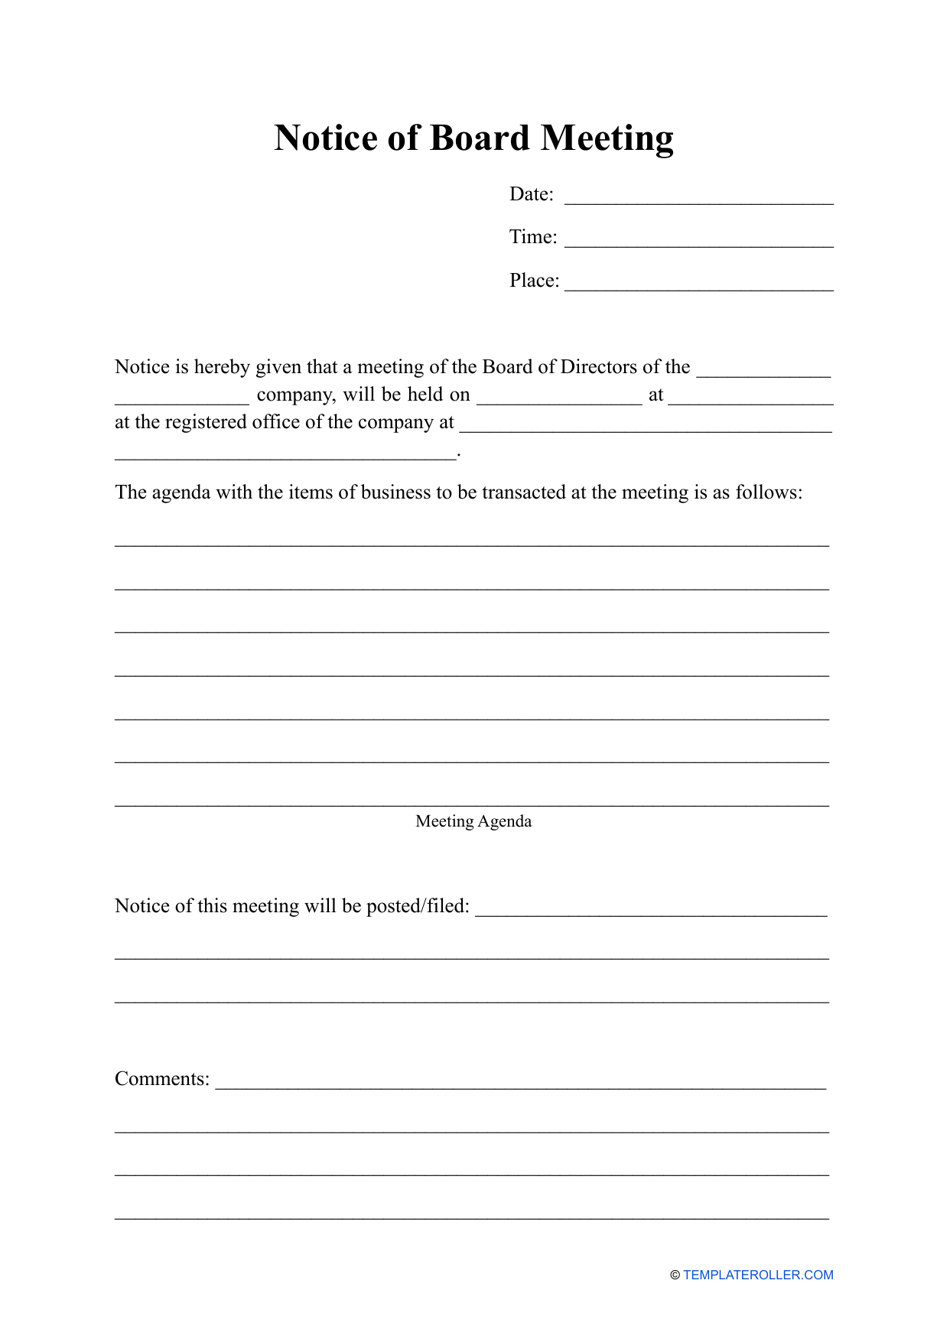 Notice of Board Meeting Template, Page 1